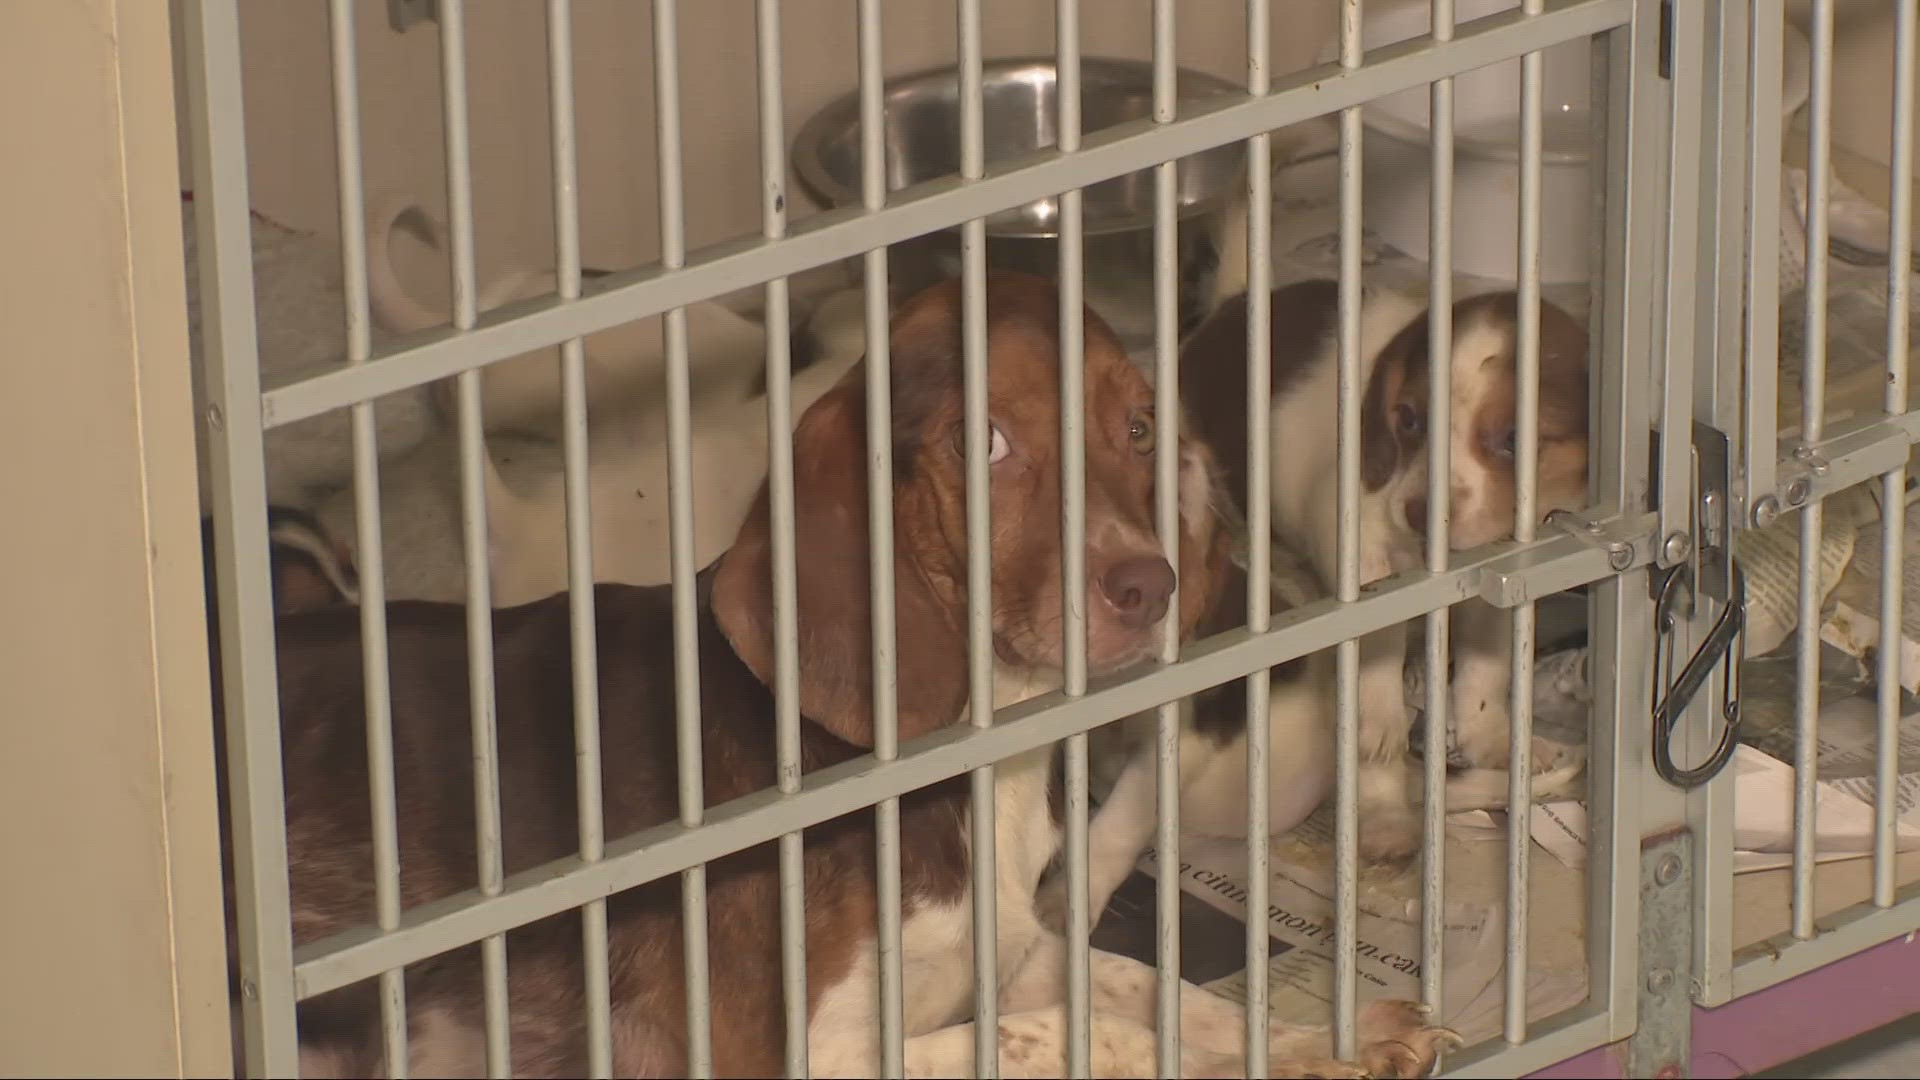 One dog has since died. The rest are currently at the Humane Society in Mansfield. The couple's four grandchildren were relocated.